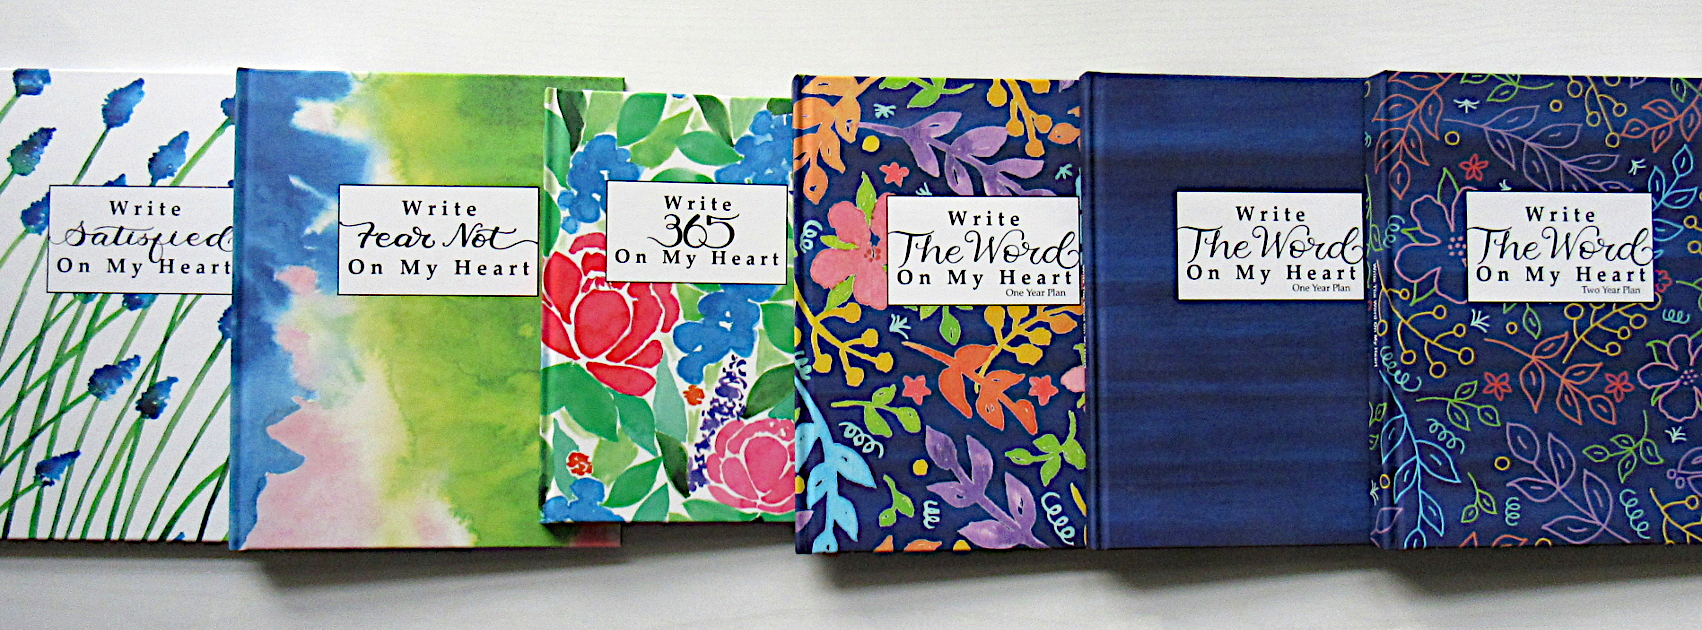 Scripture Writing Supplies - Write Them On My Heart